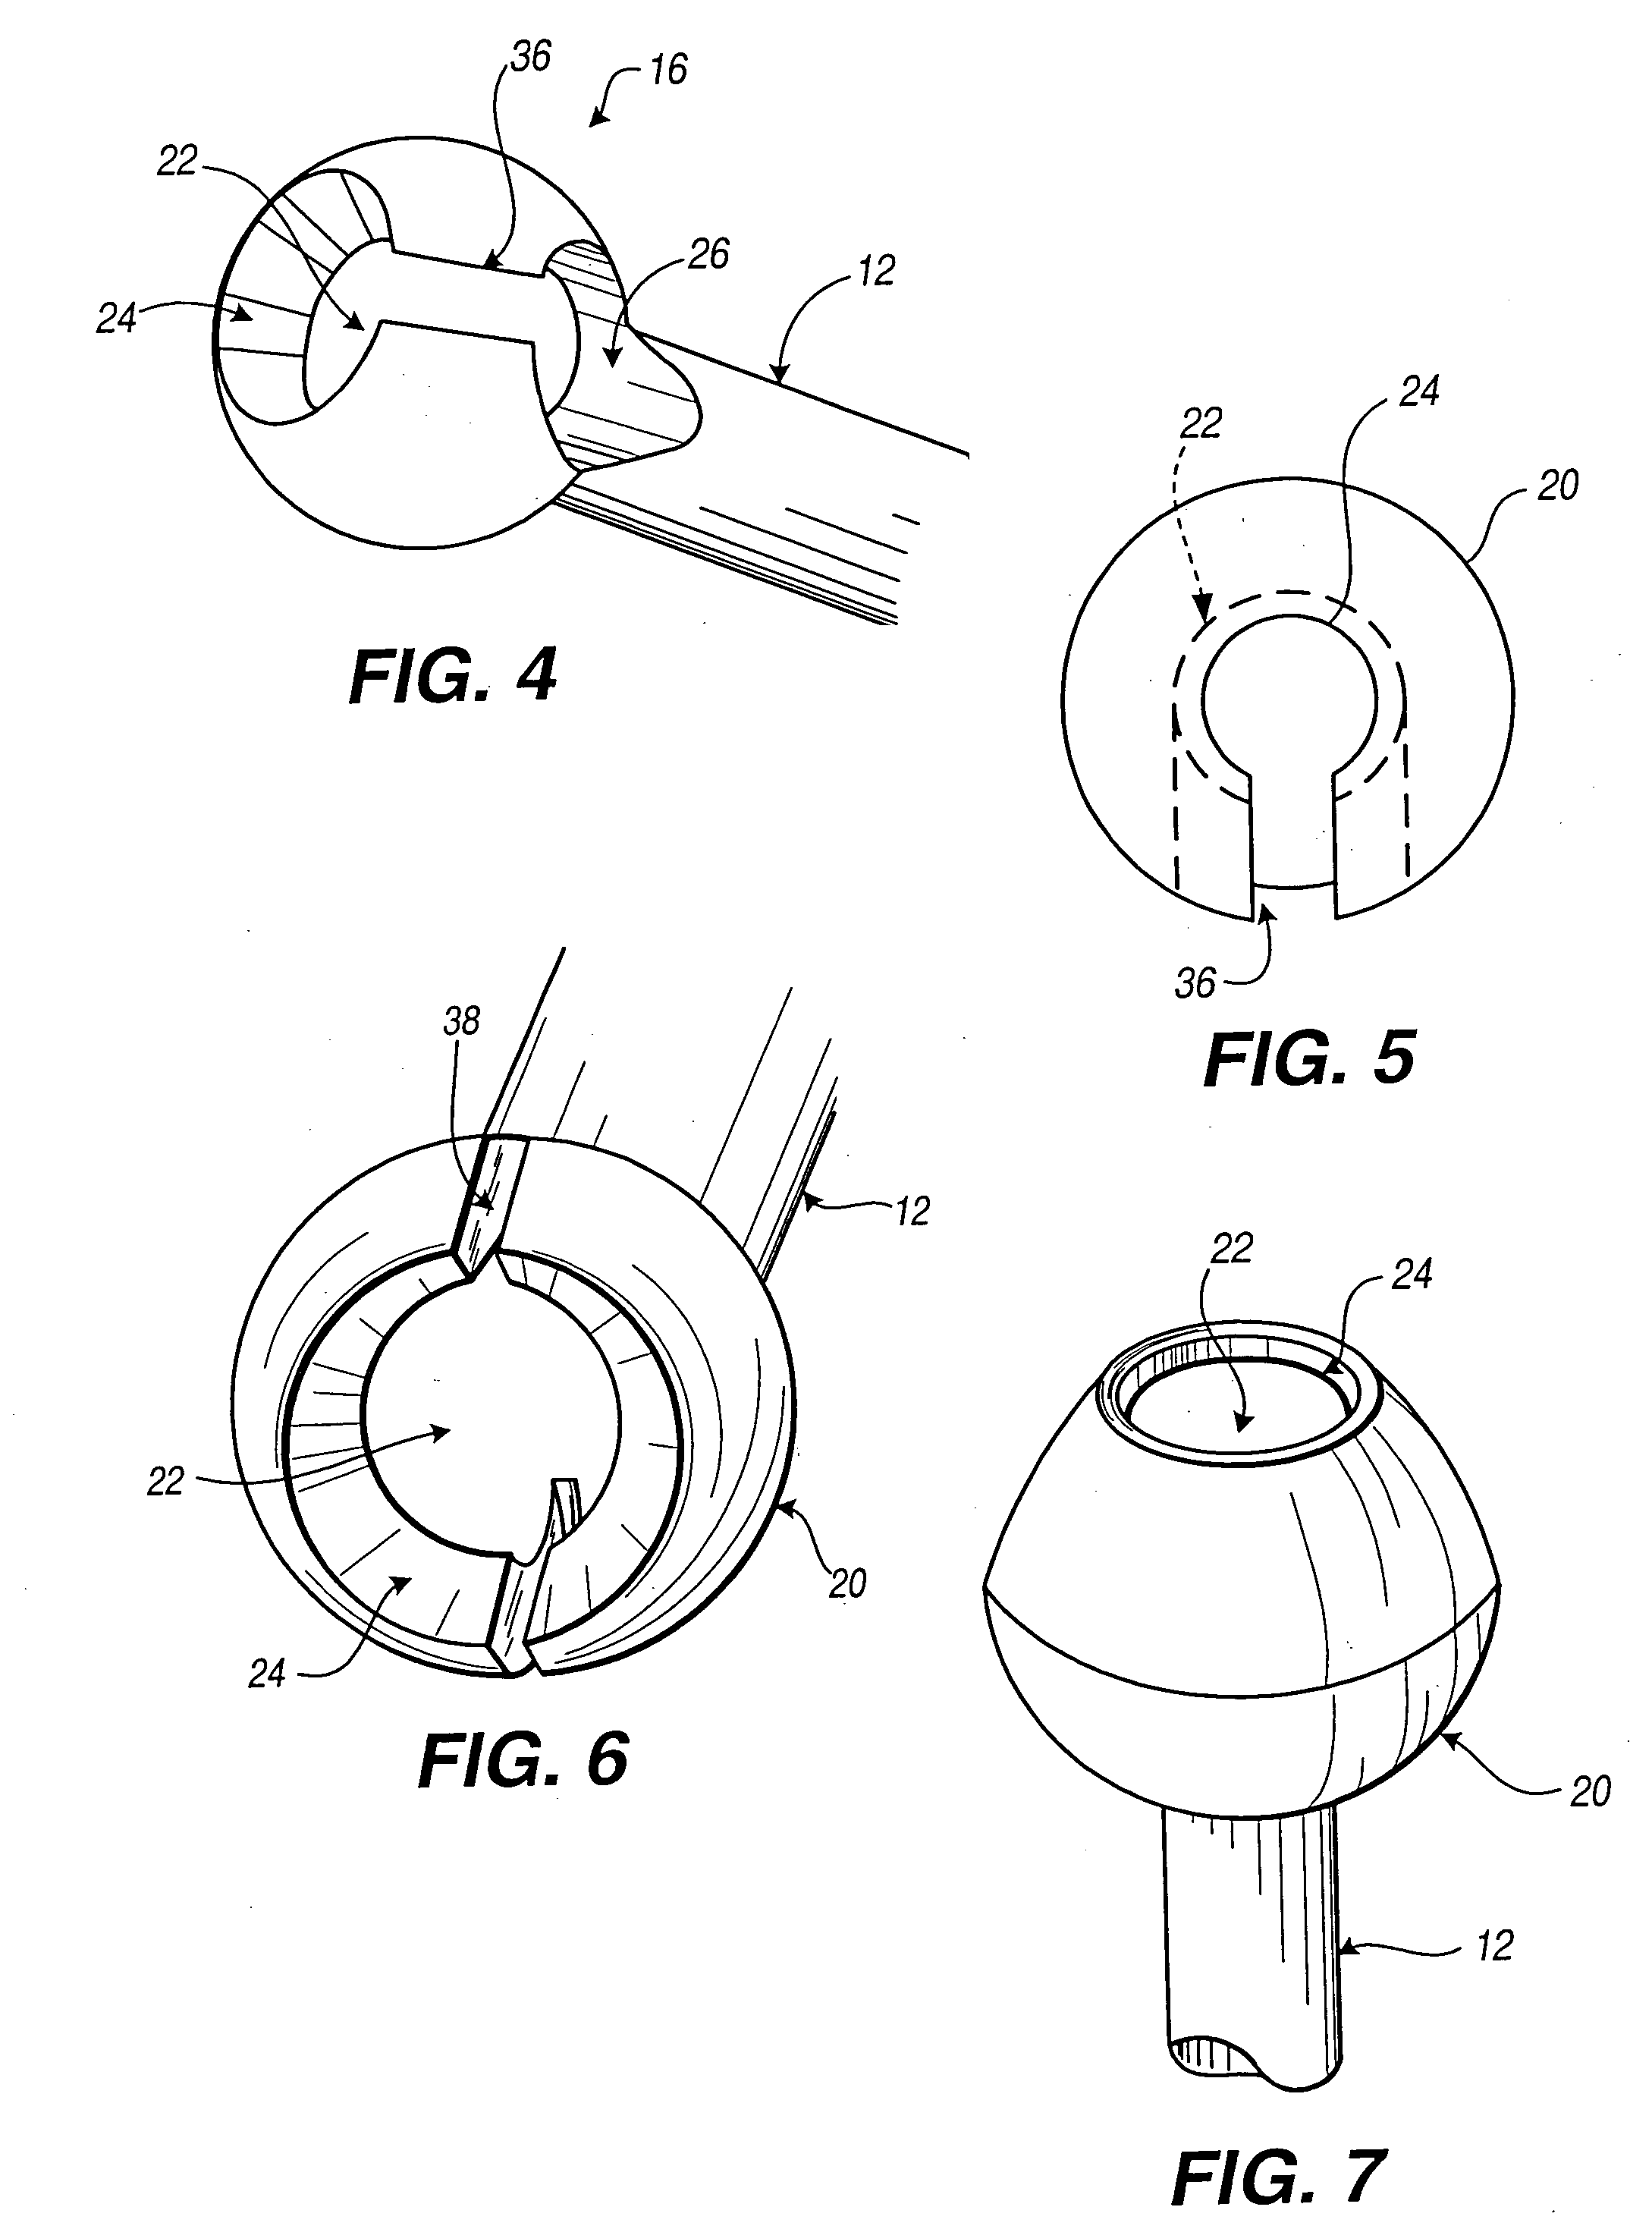 Connection rod for screw or hook polyaxial system and method of use